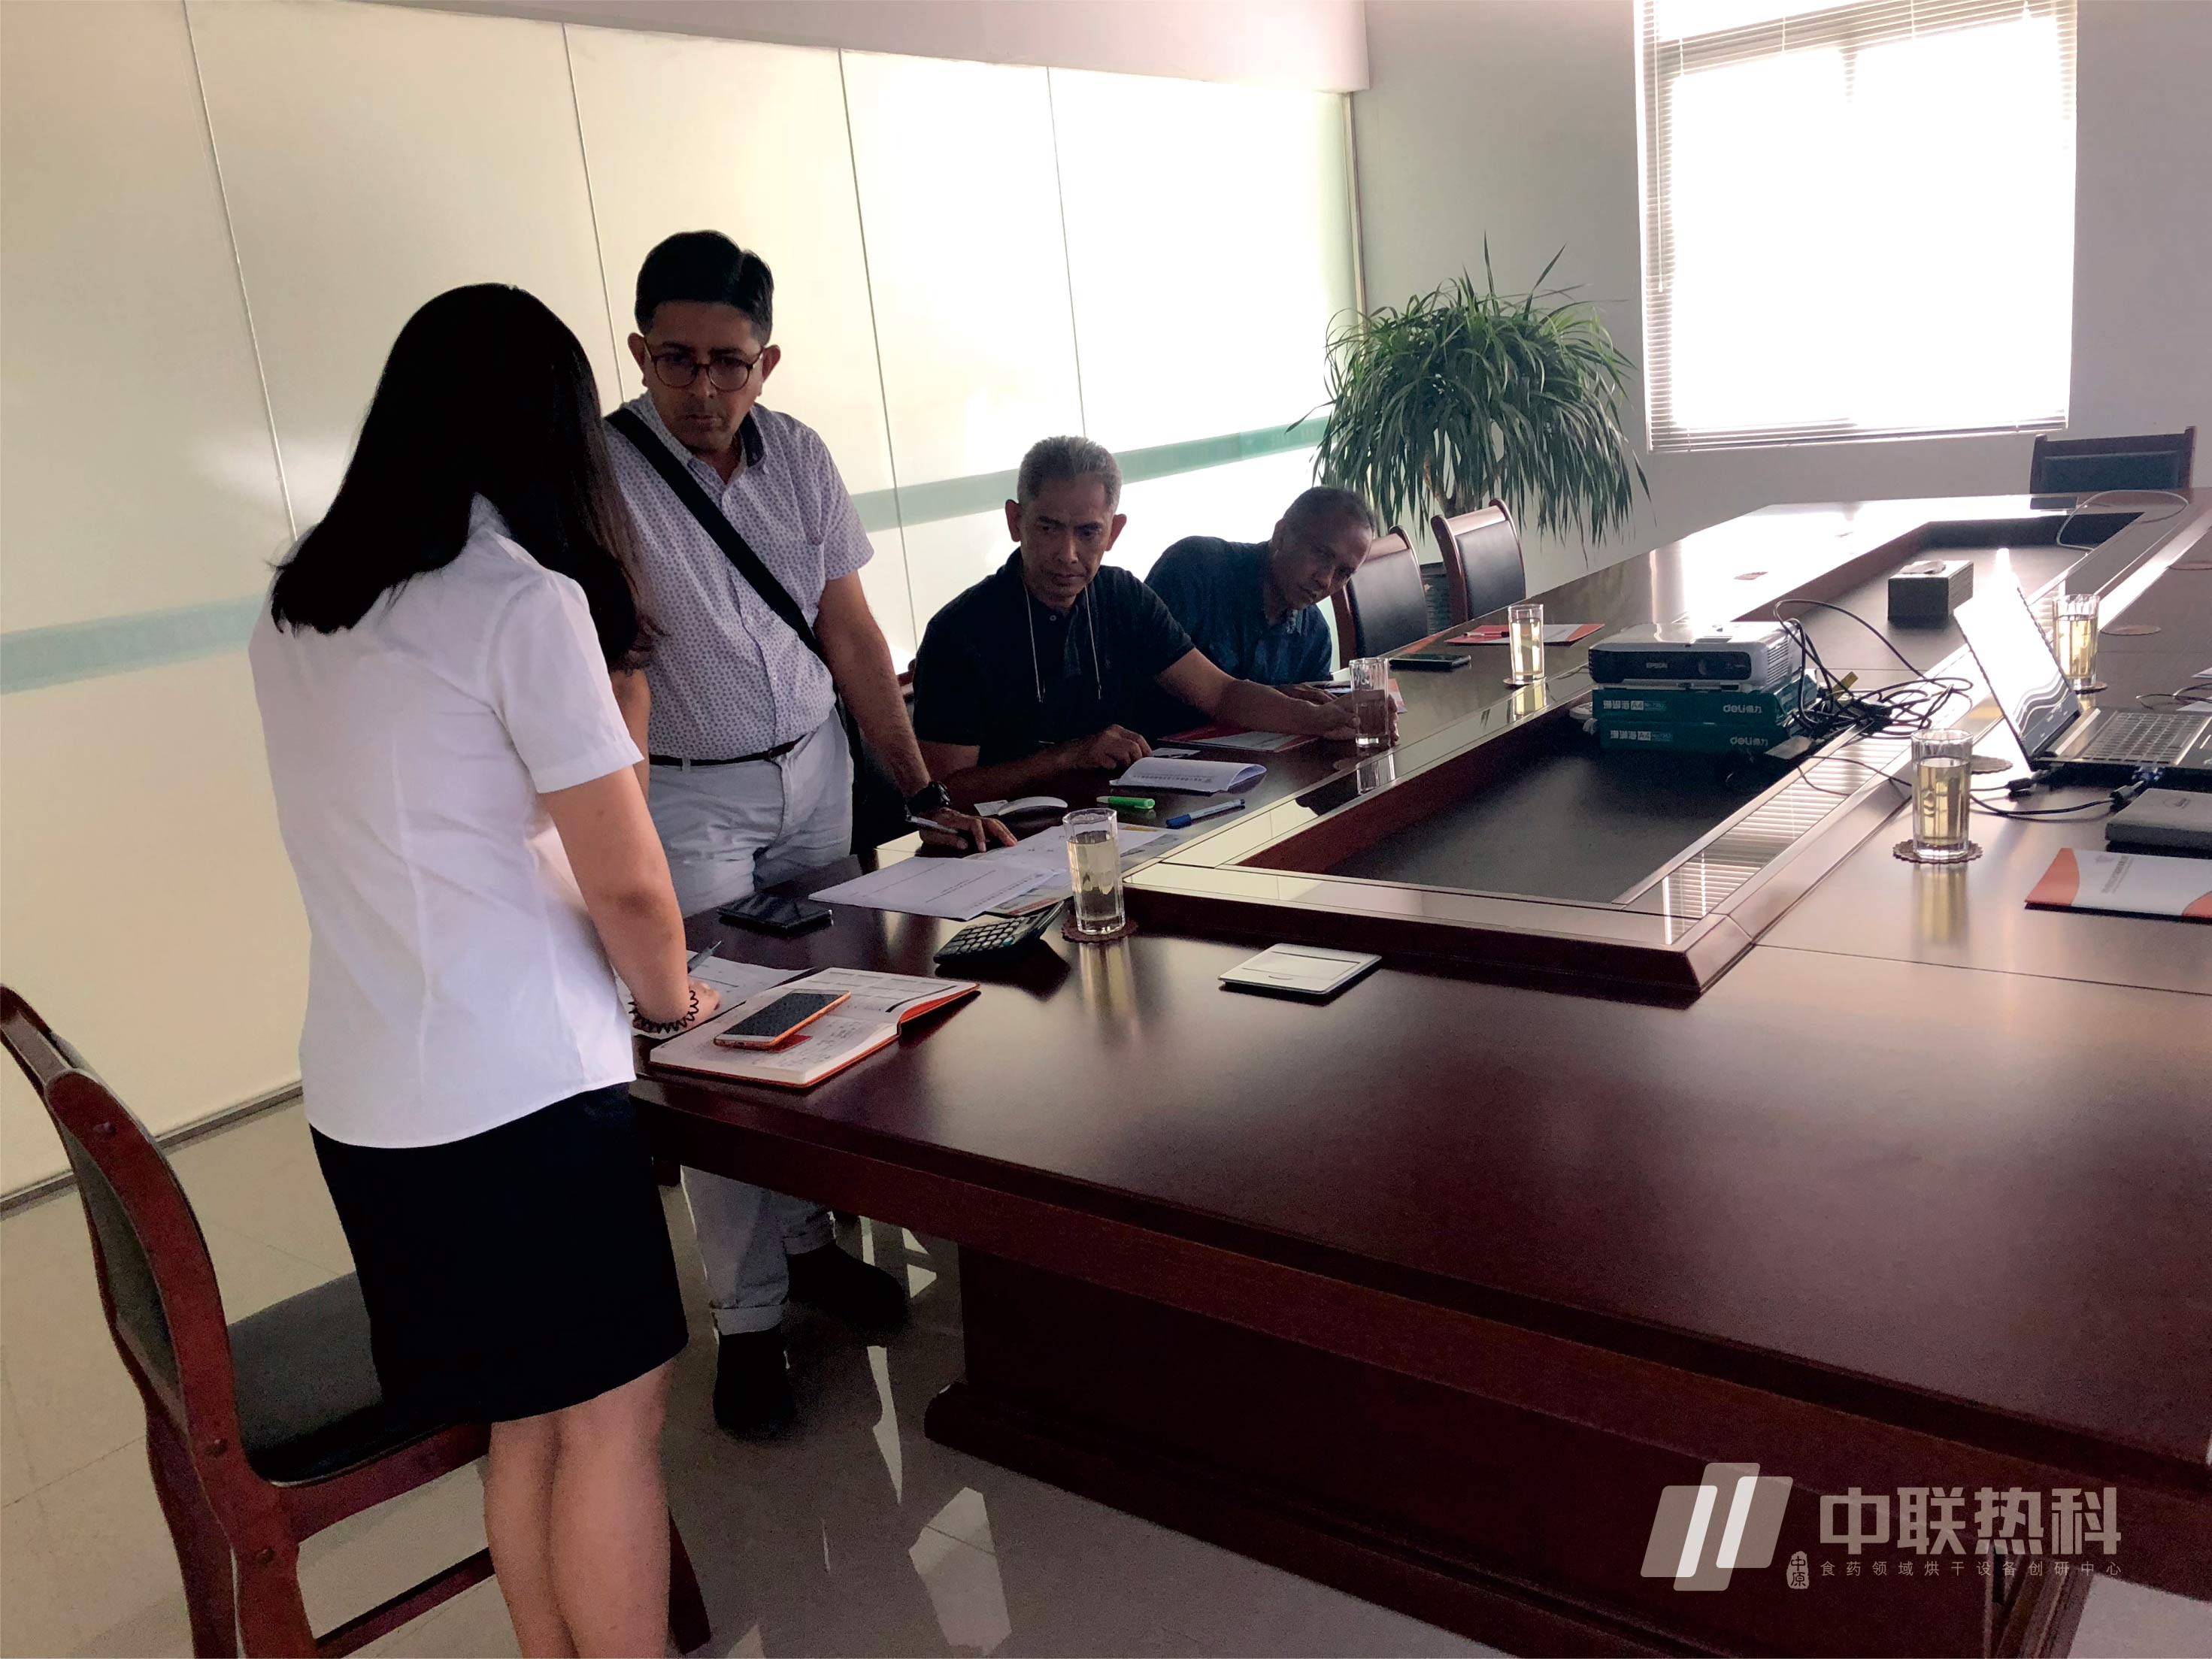 Visit of Indonesia customers to our factory